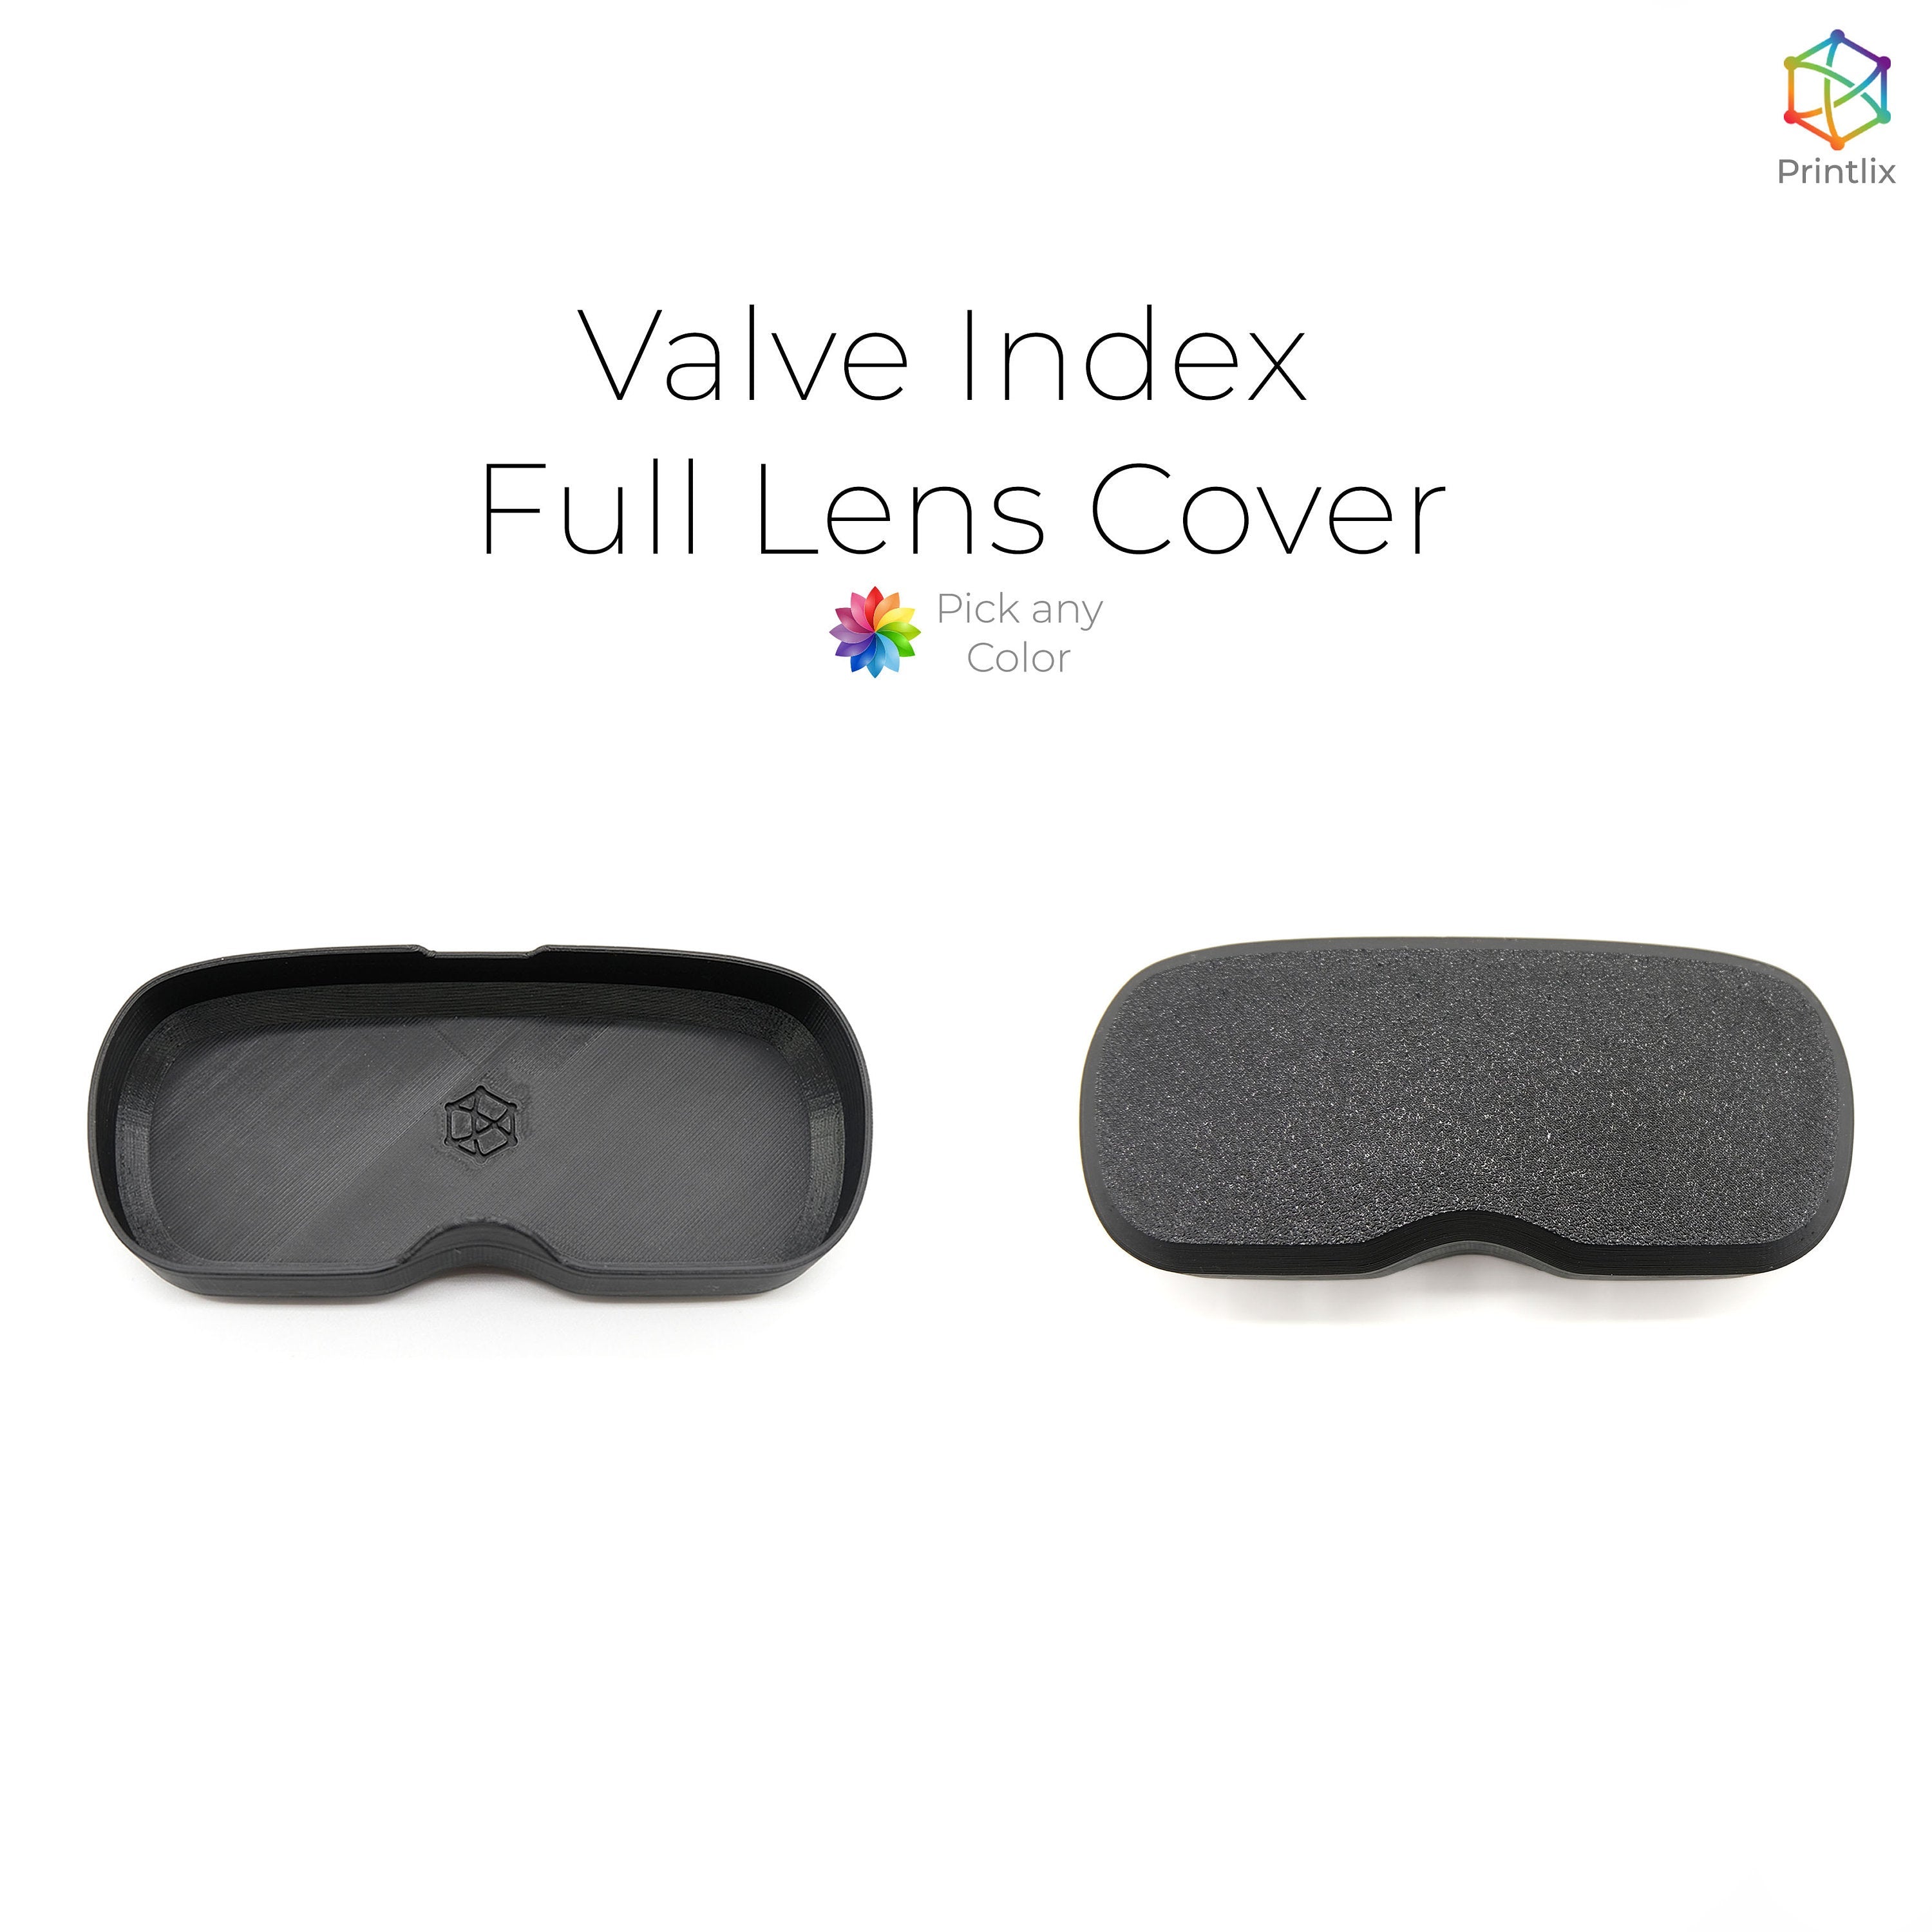 Valve Index Full Lens Cover/Protection